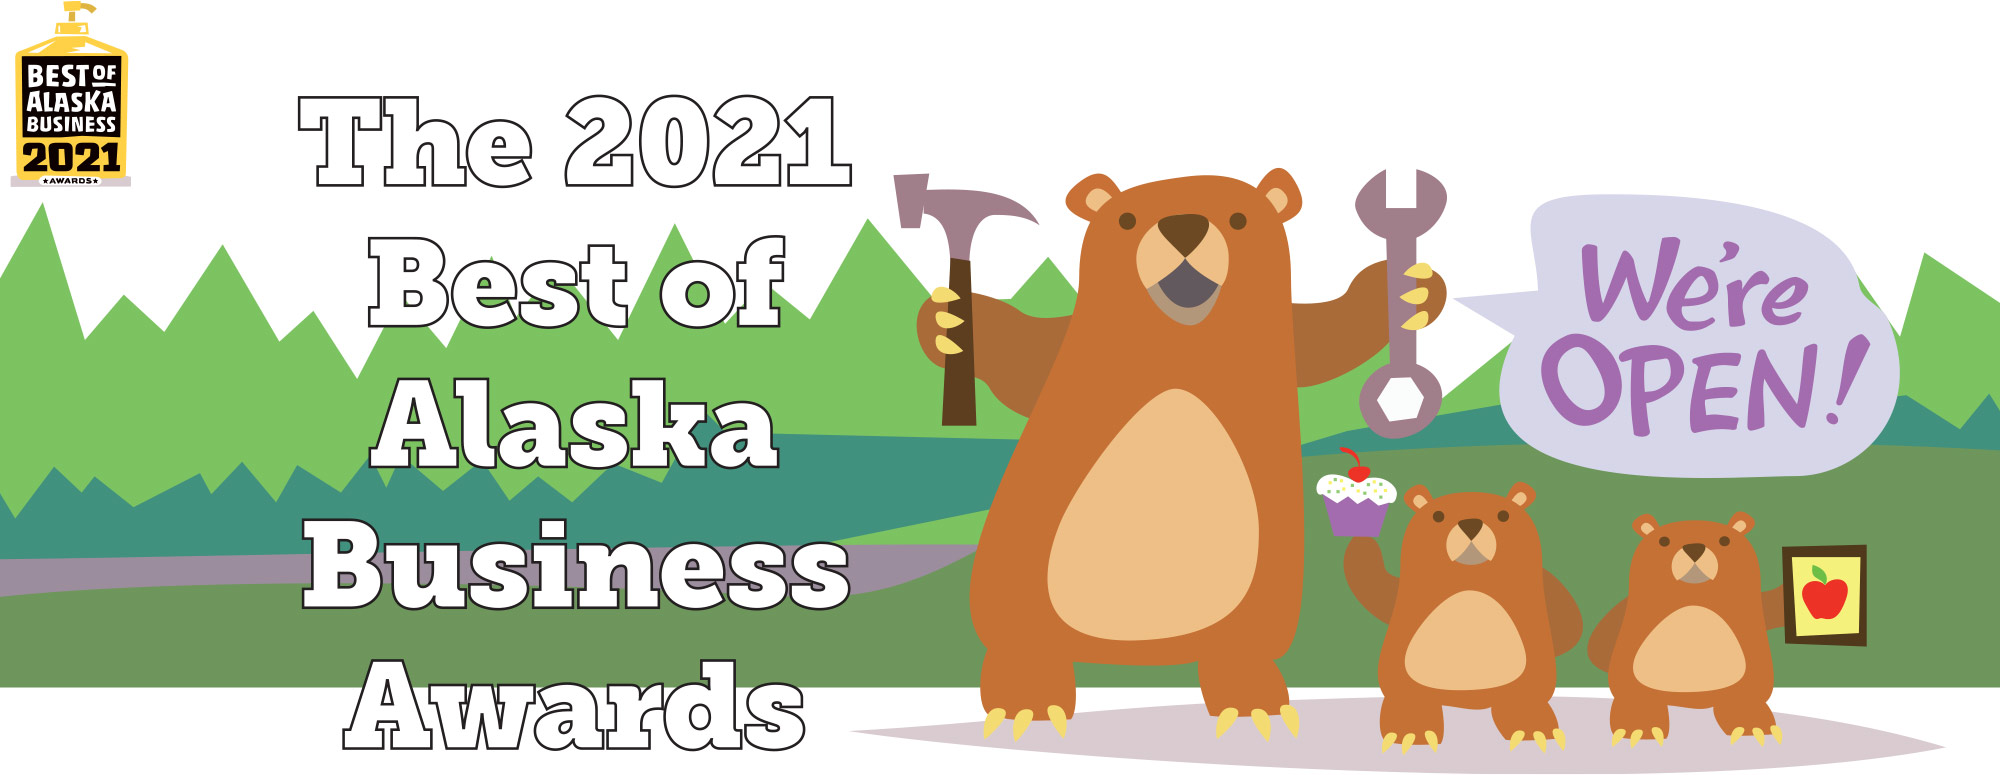 The 2021 Best of Alaska Business Awards title with clipart of three bears golding tools, a cupcake, and a painting of an apple